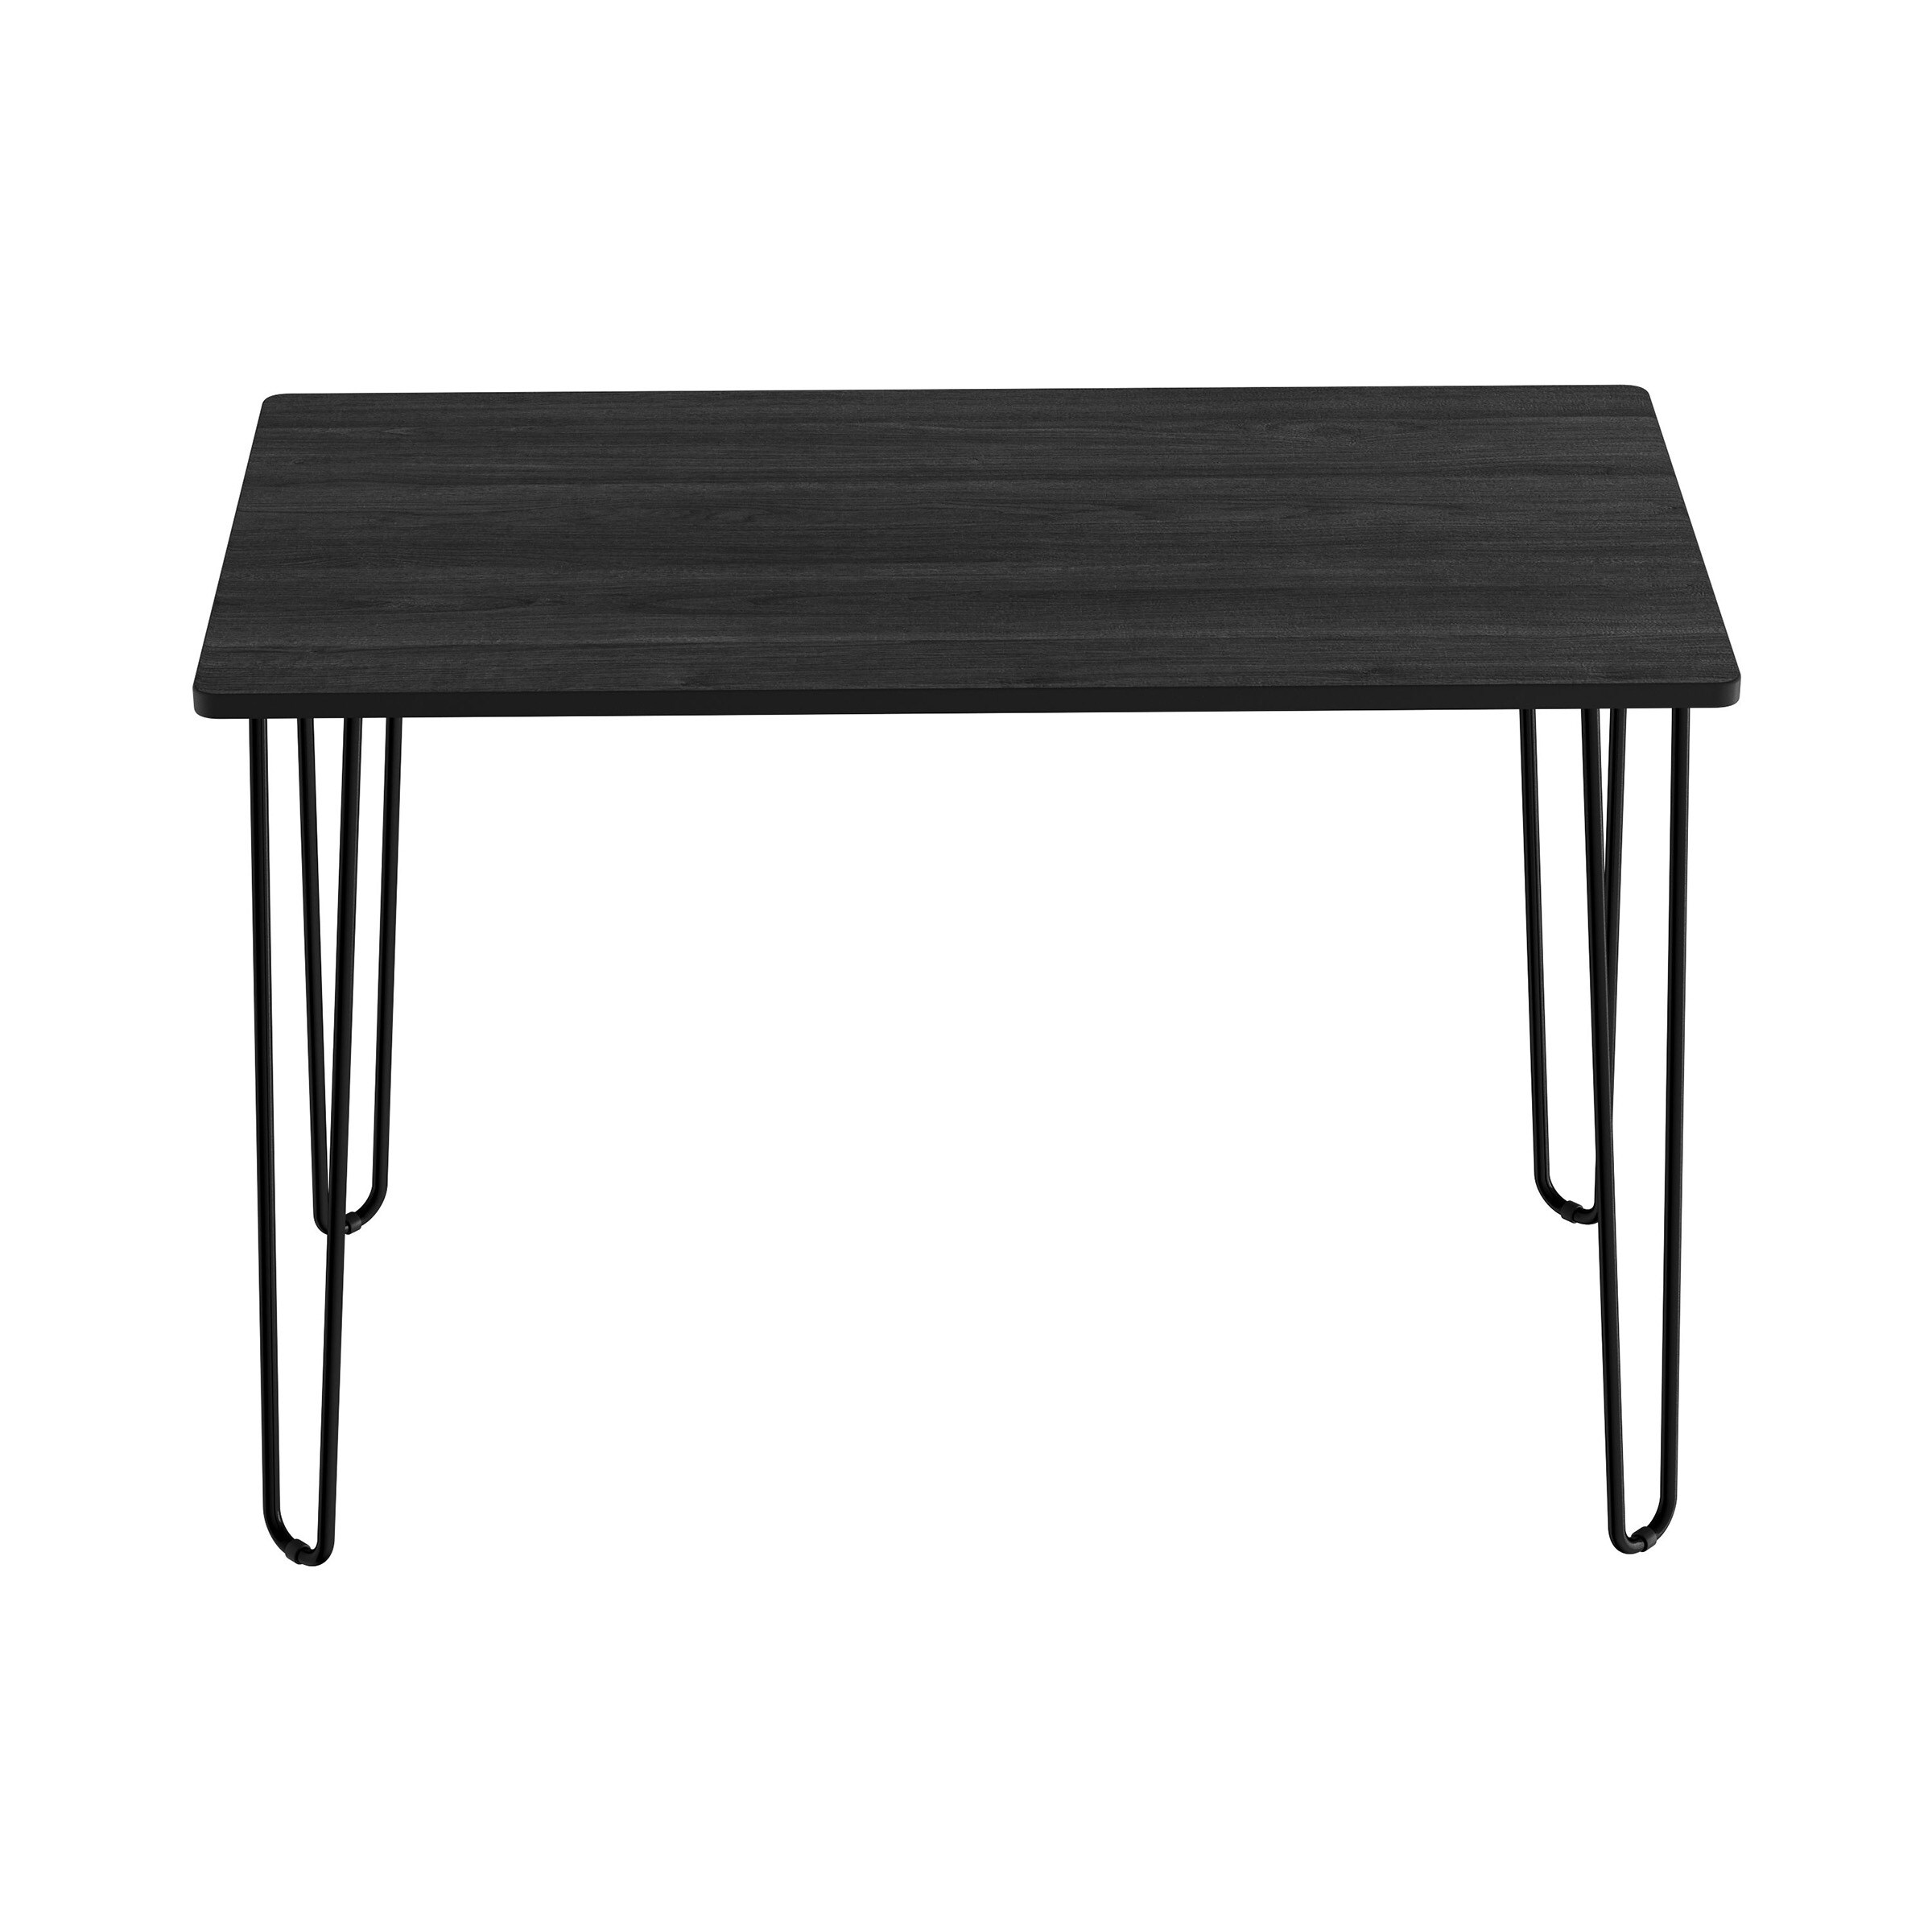 Desk with Hairpin Legs - Modern Industrial Style Home Decor - Woodgrain-Look and Steel Accent by Lavish Home (Black)